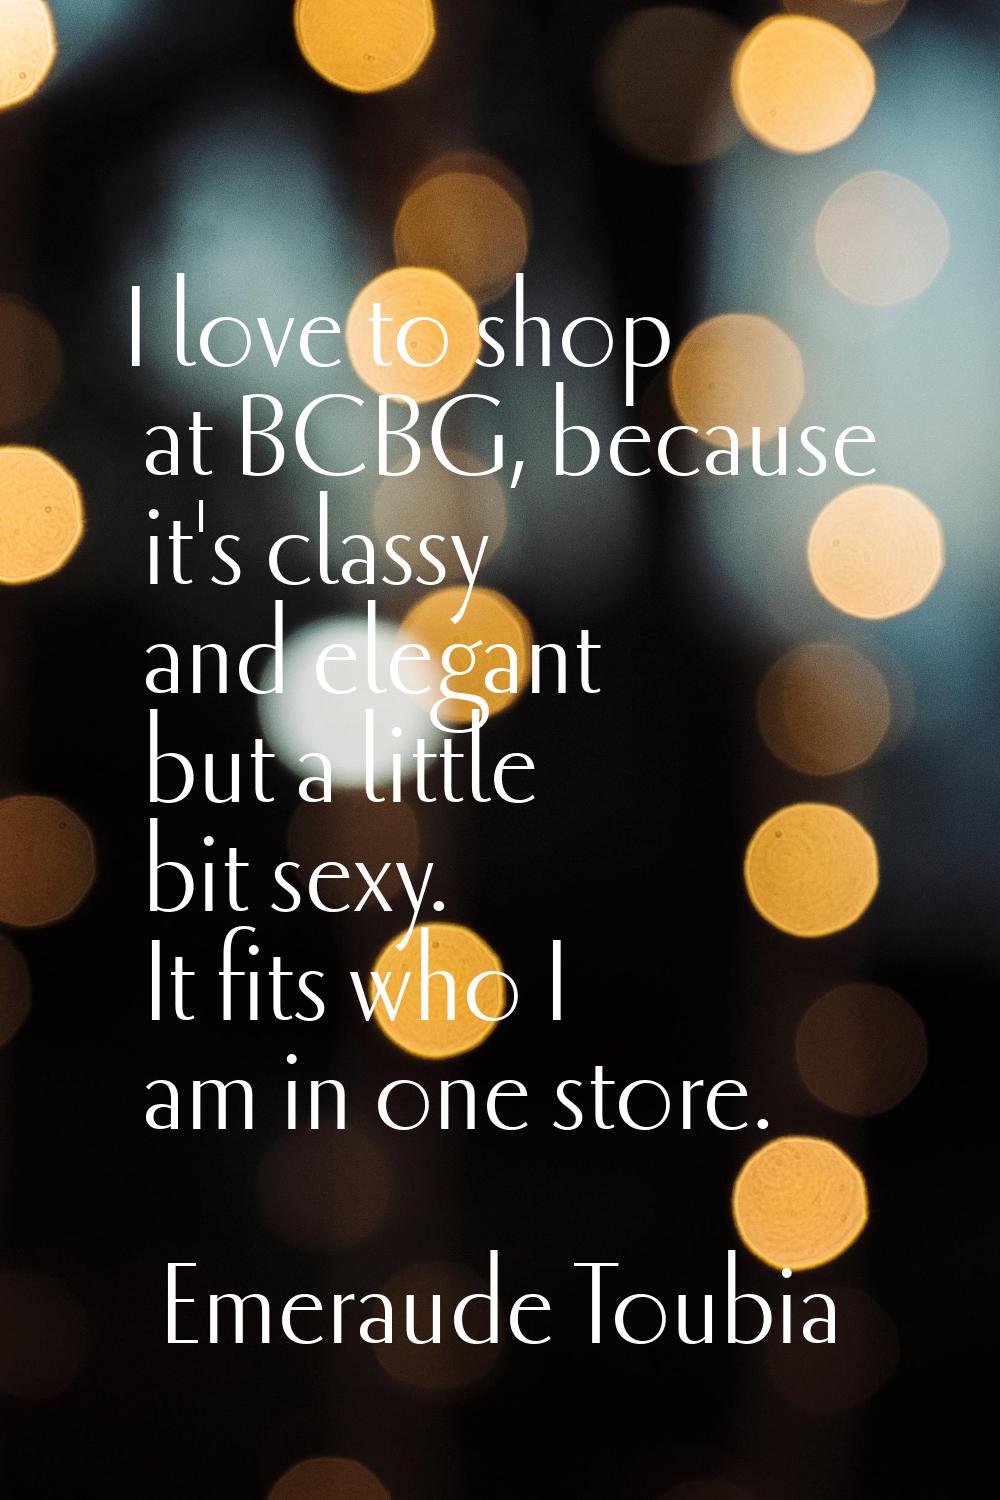 I love to shop at BCBG, because it's classy and elegant but a little bit sexy. It fits who I am in 